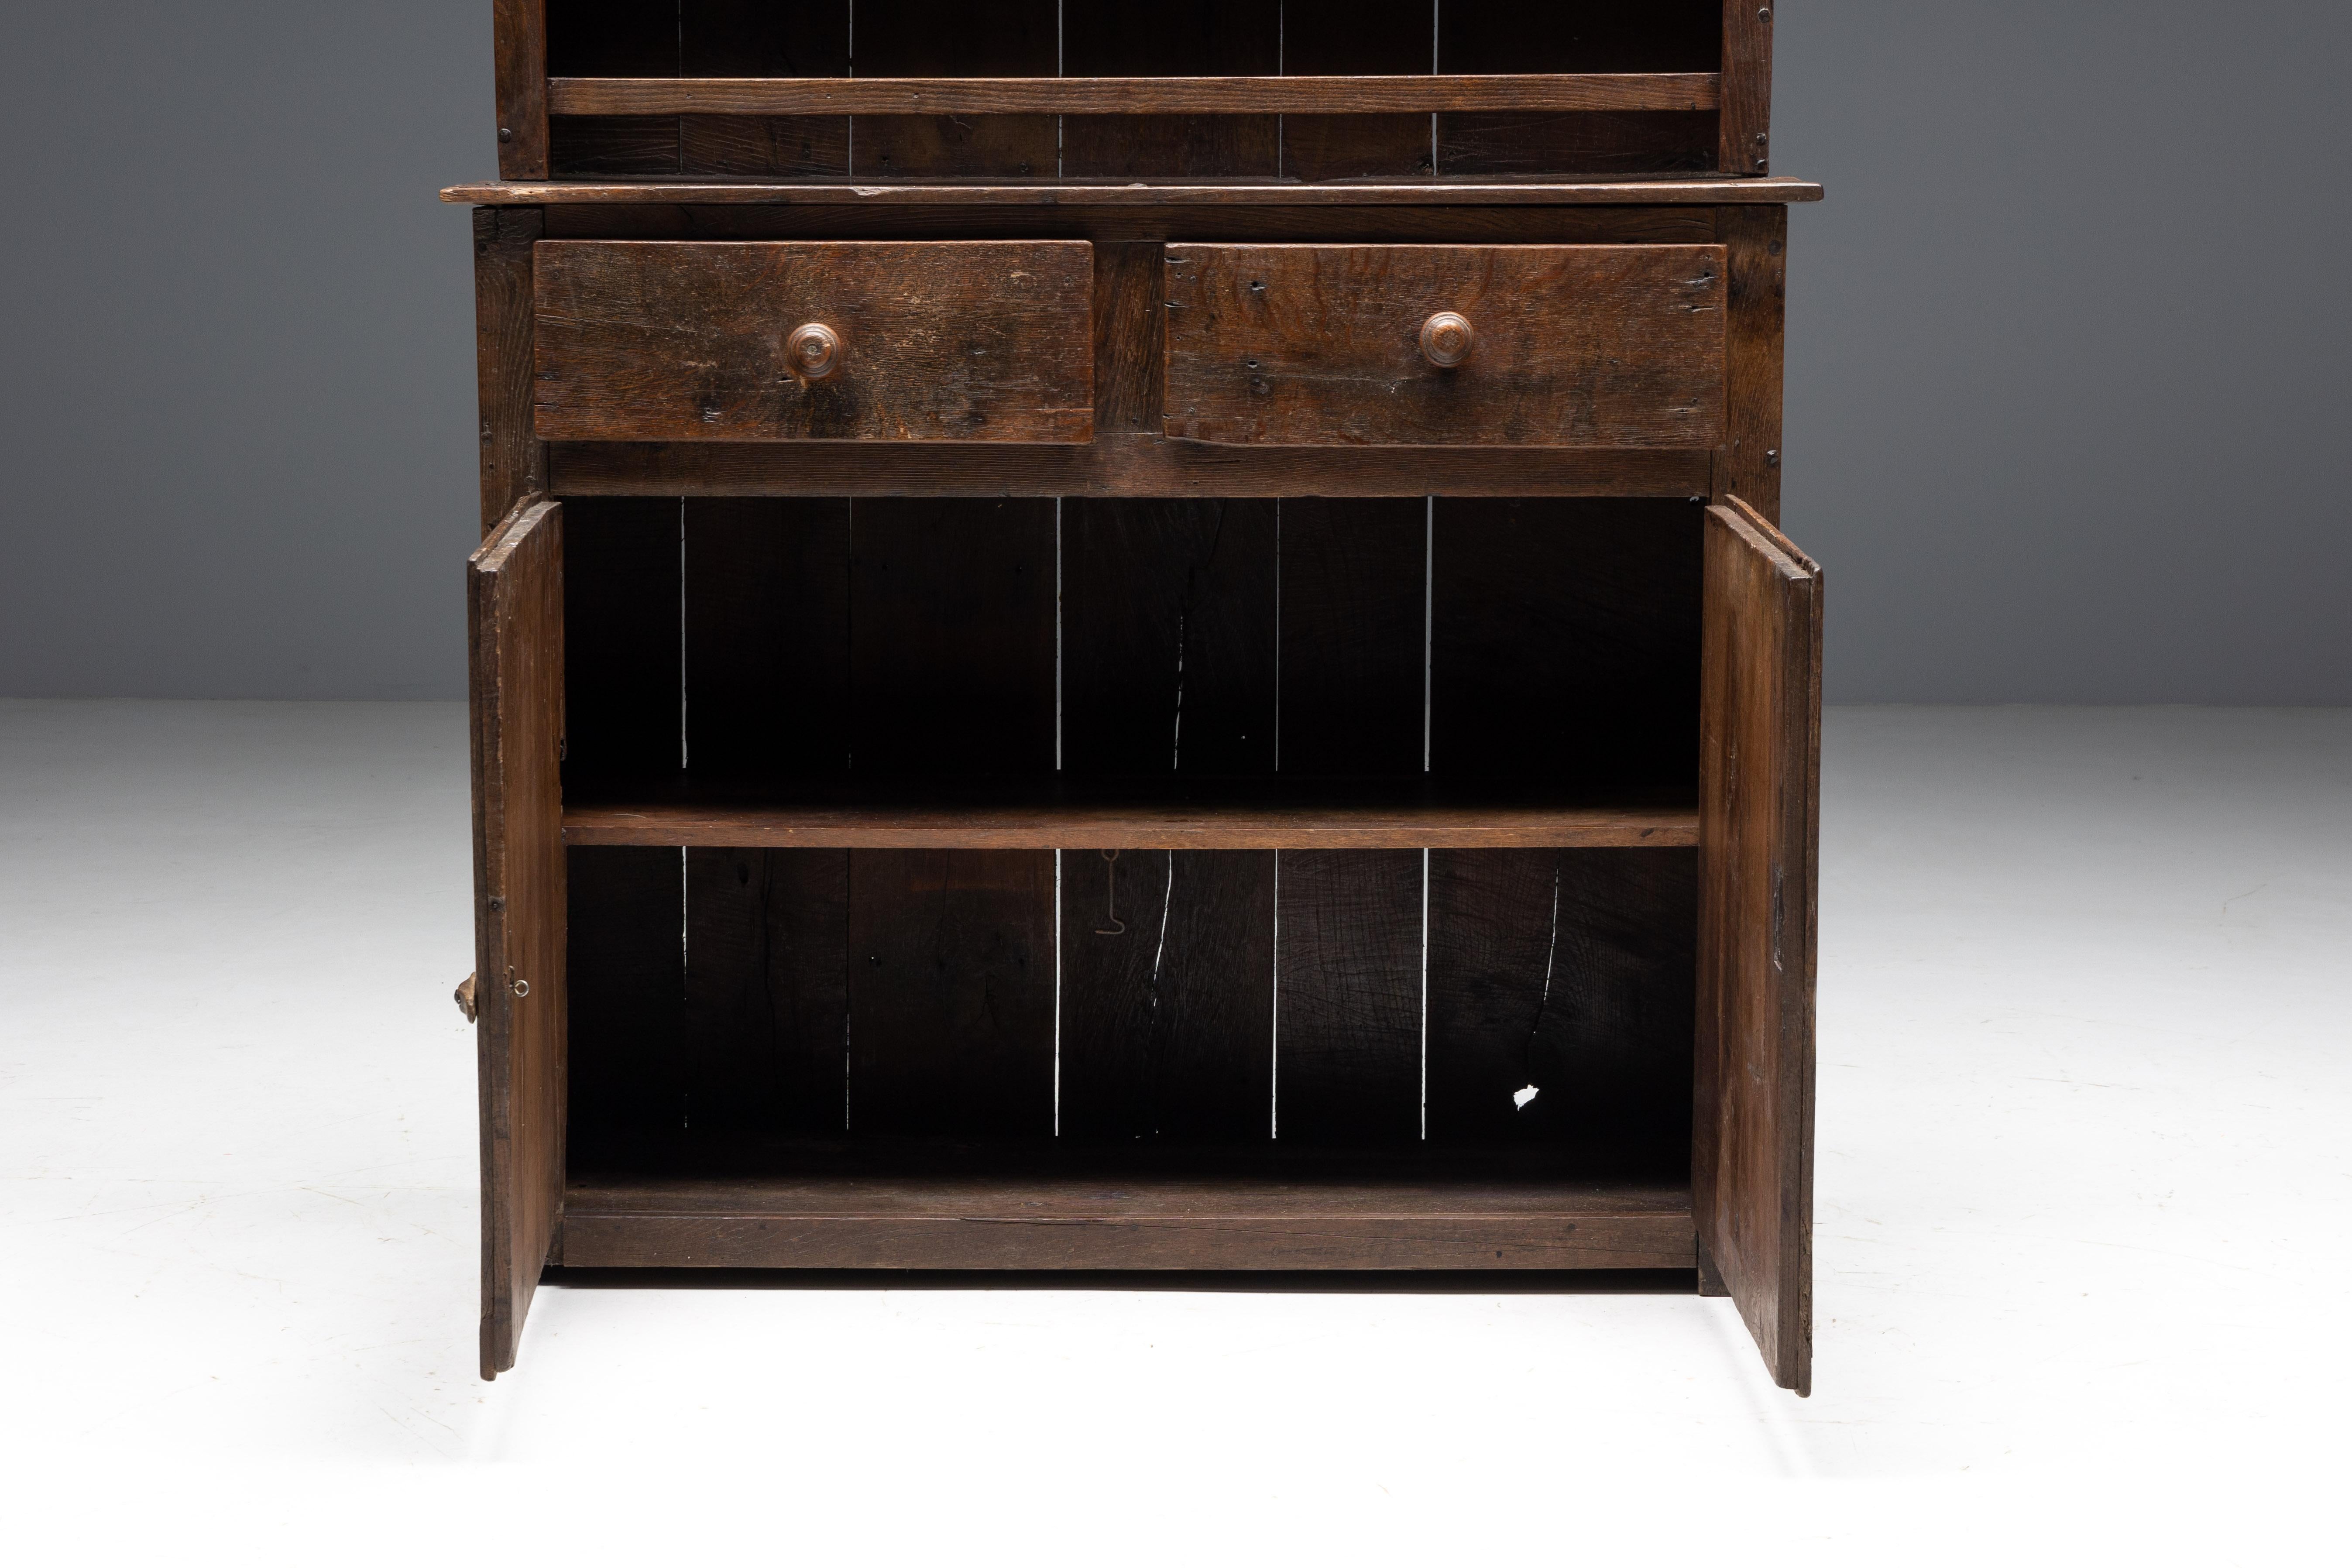 Rustic Travail Populaire Cupboard, France, Early 19th Century For Sale 3